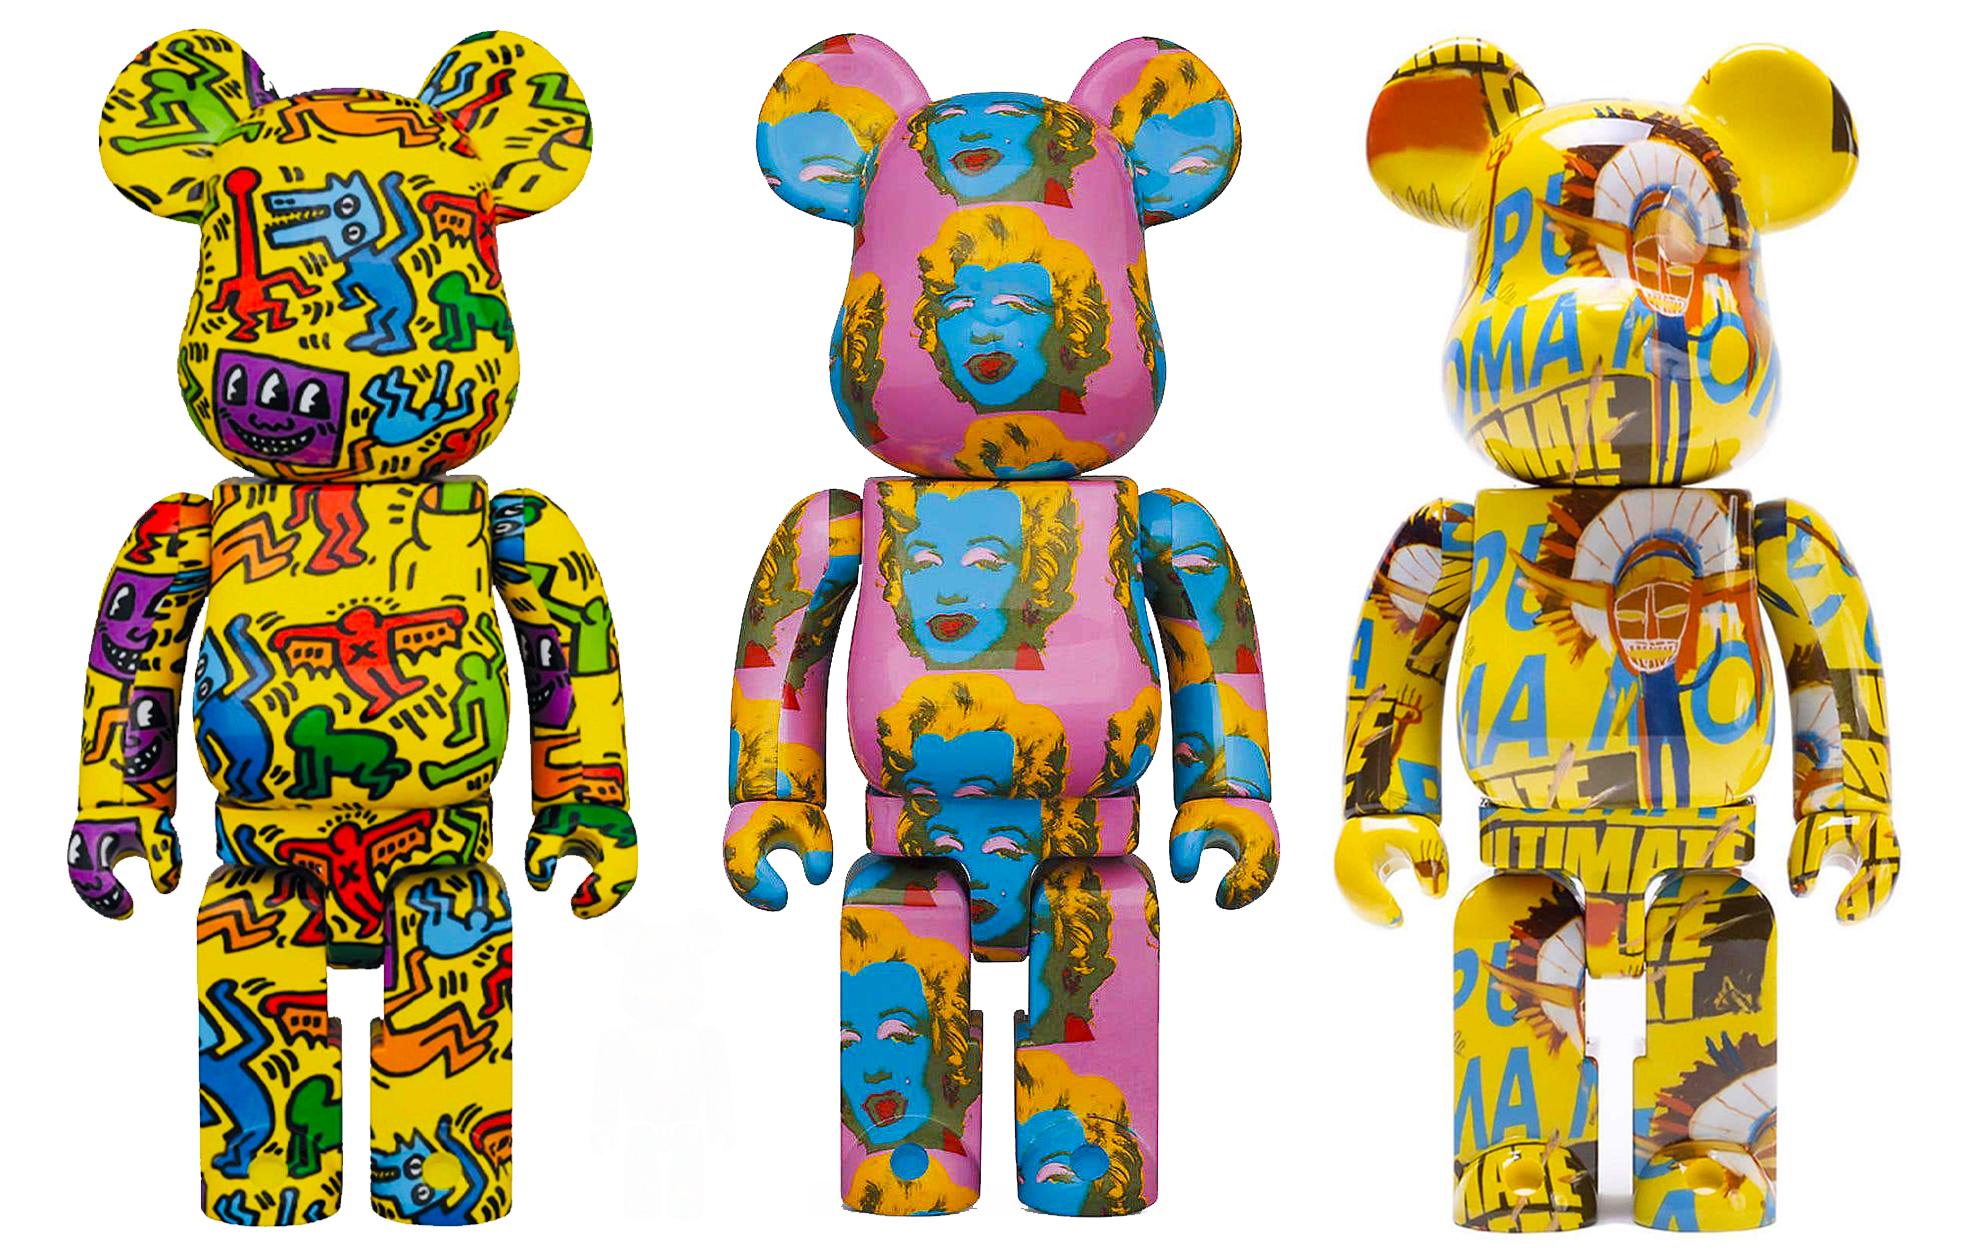 Keith Haring, Andy Warhol, Jean-Michel Basquiat Bearbrick 400%: set of 3 works  - Print by after Jean-Michel Basquiat